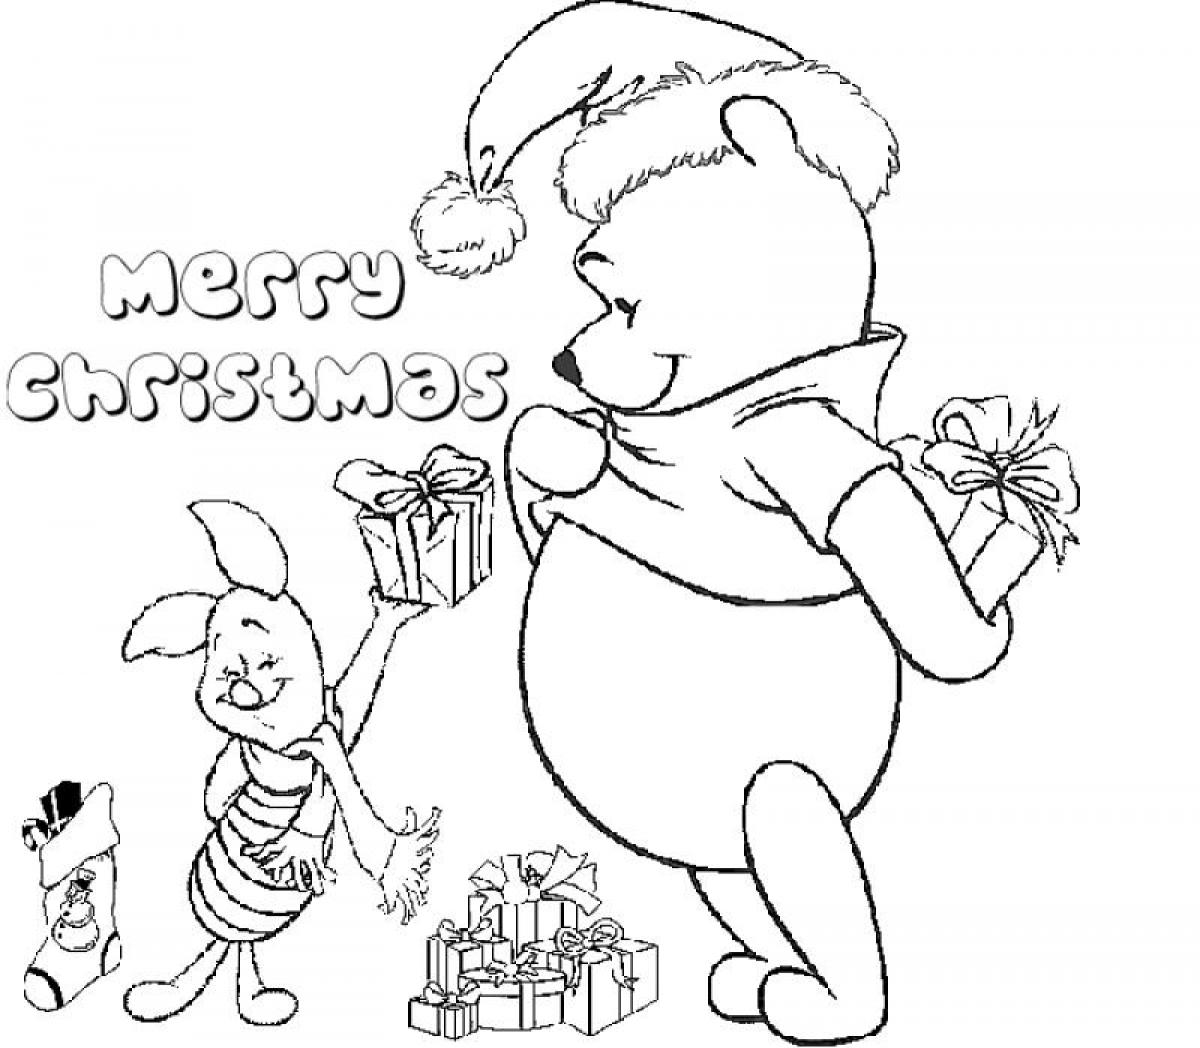 Merry Christmas Coloring Pages Print At GetDrawings Free Download